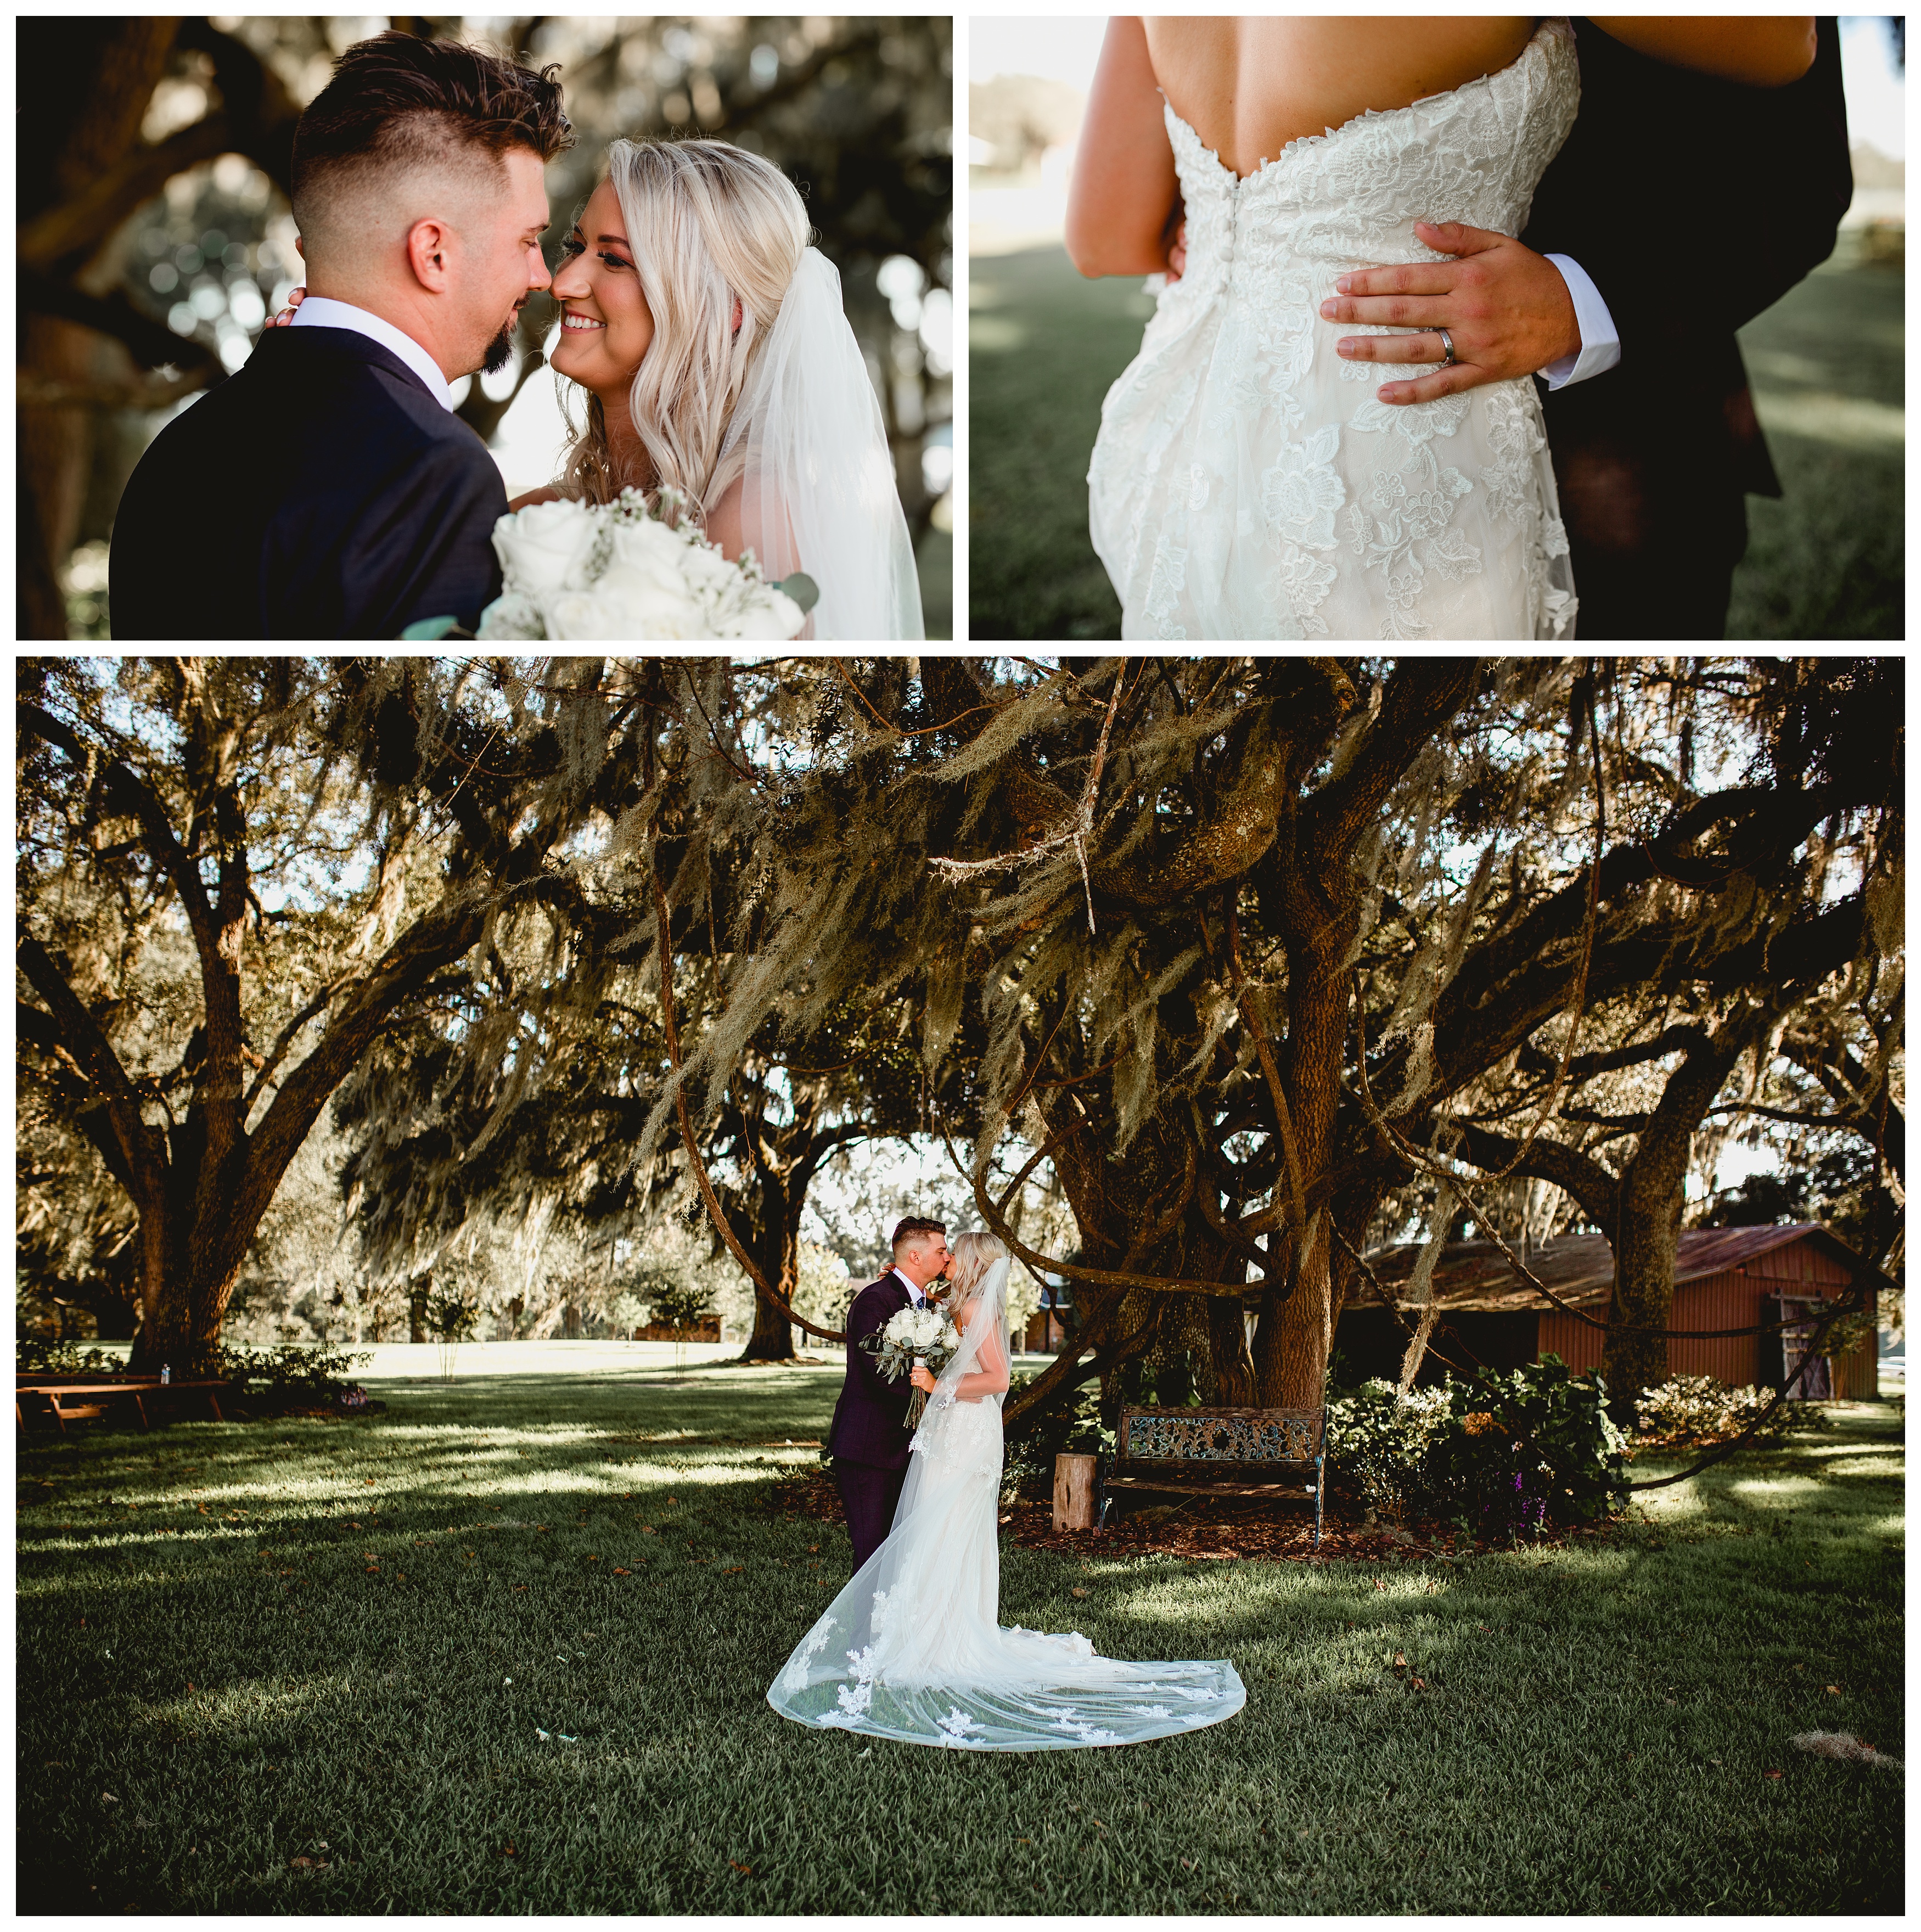 Bride and groom portraits with intimate moments. Shelly Williams Photography located in North Florida.